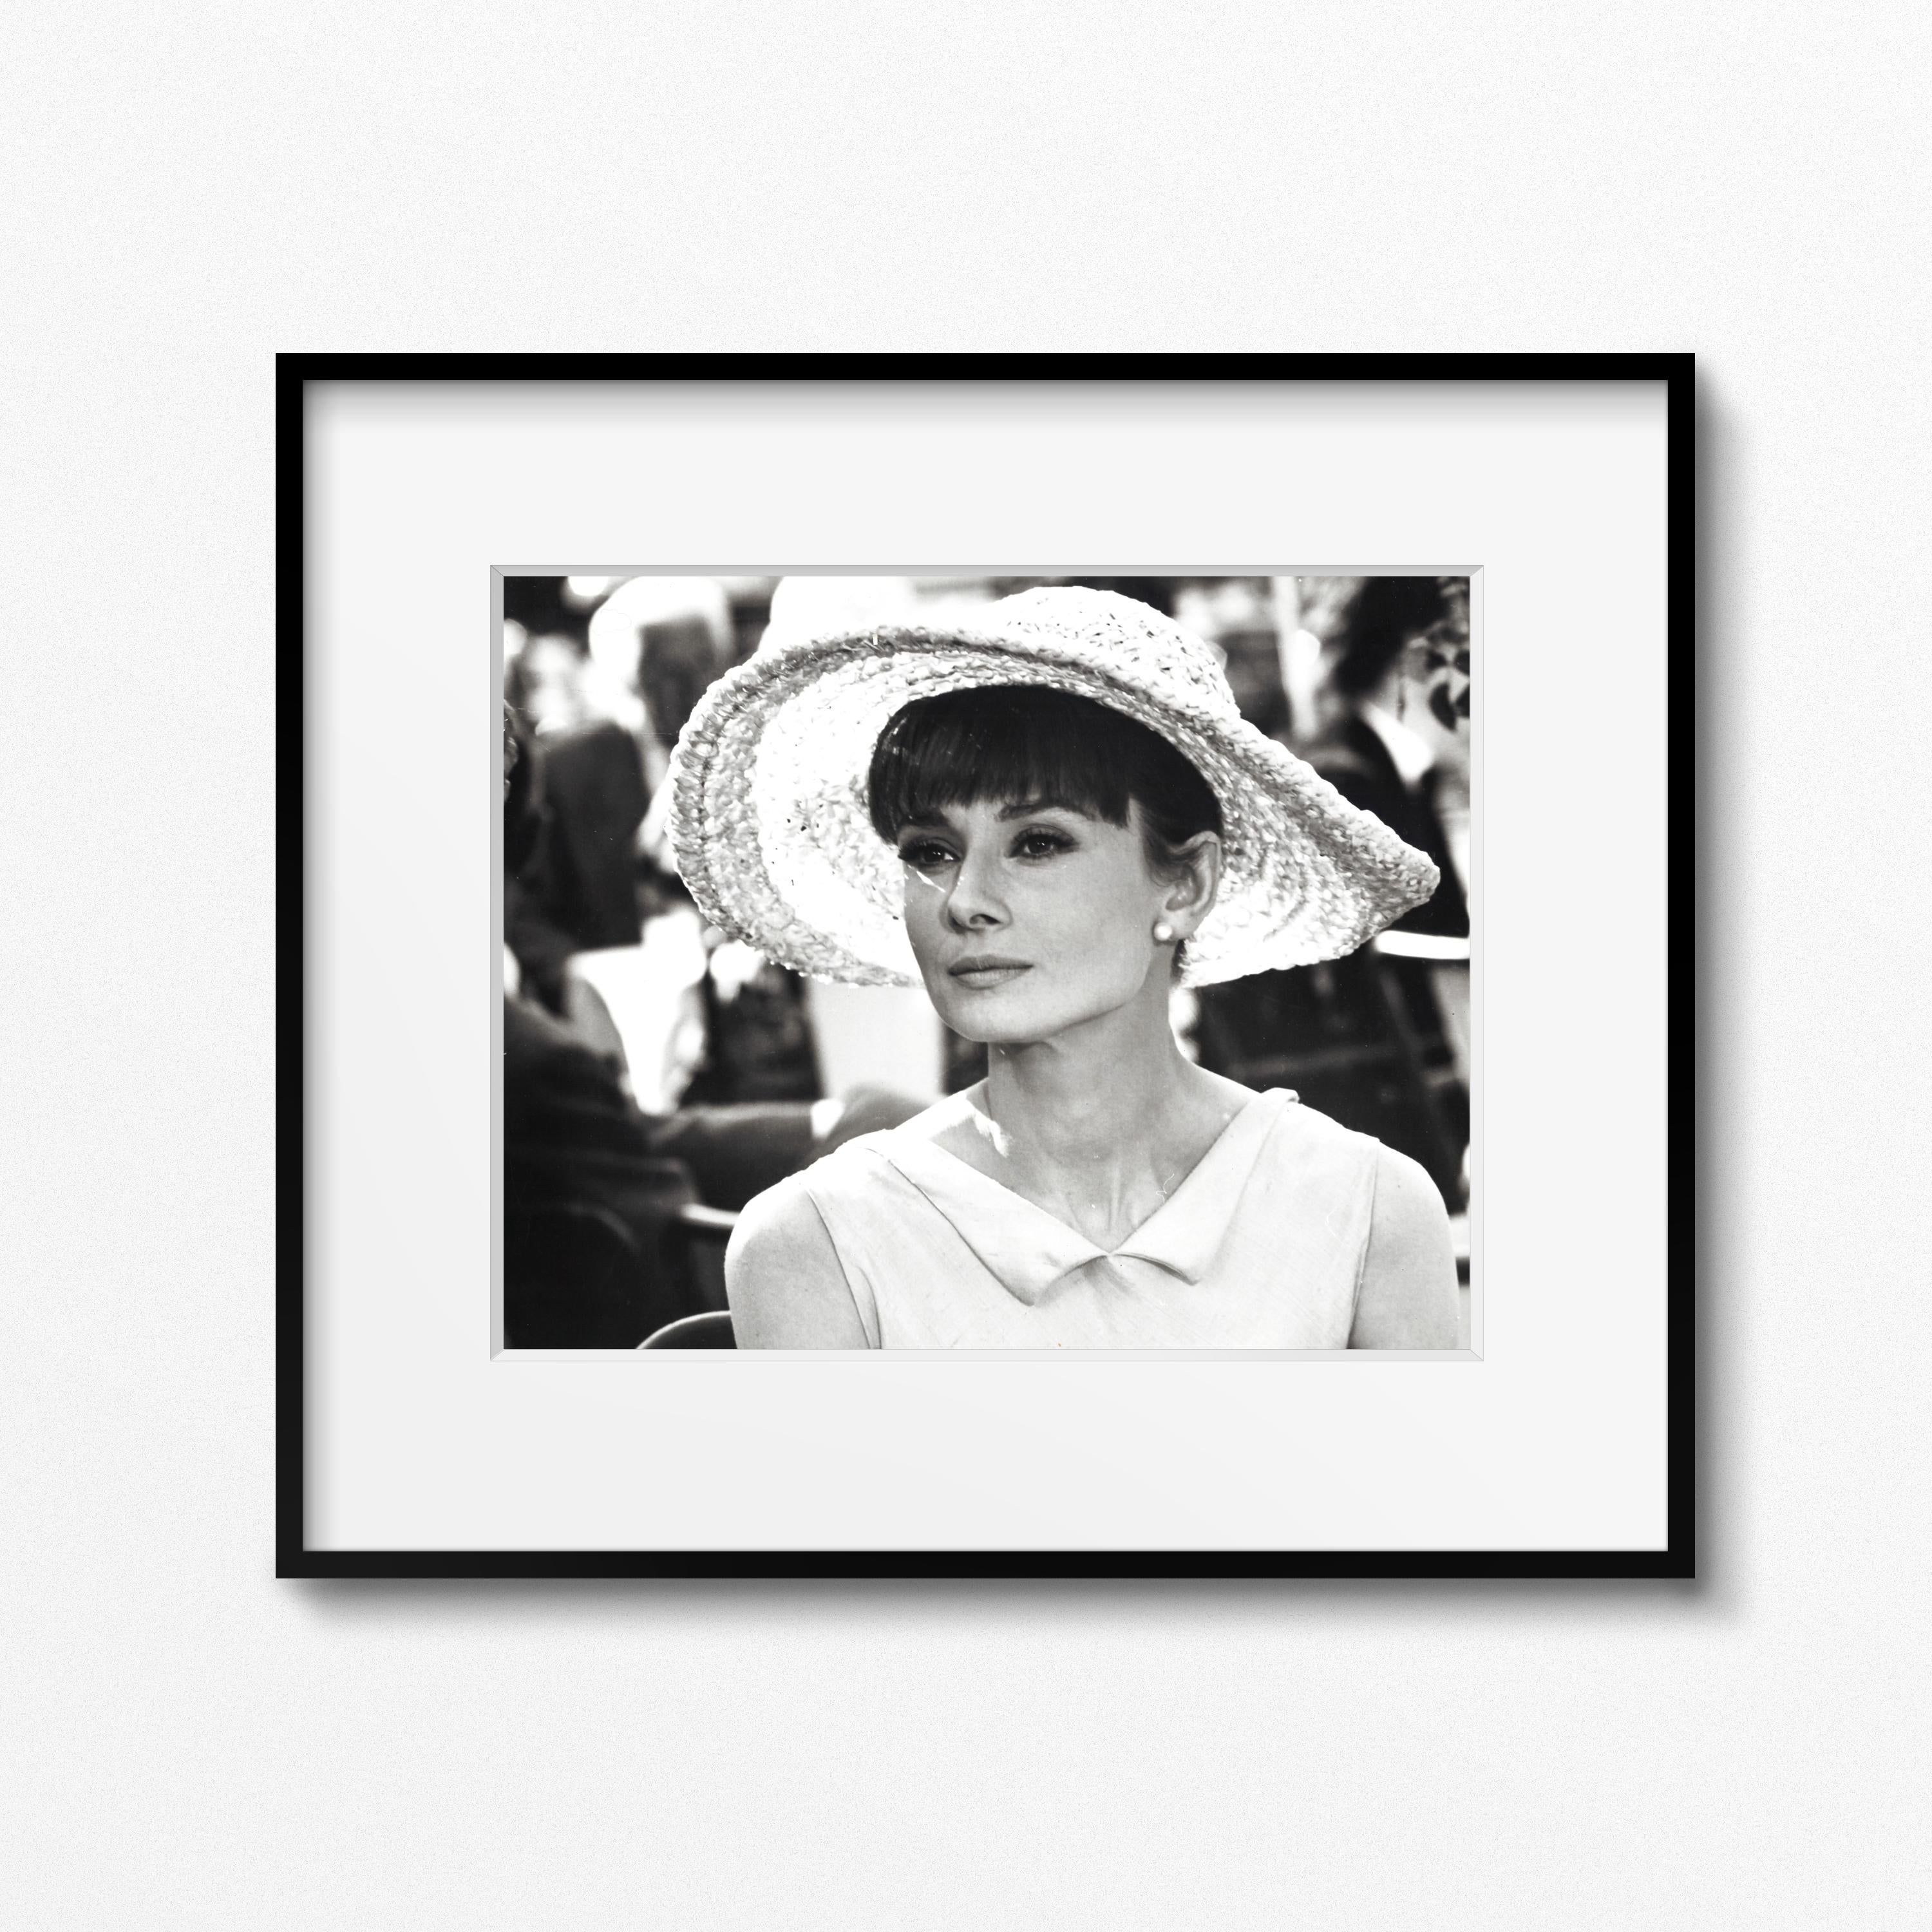 From the personal collection of Audrey Hepburn

Audrey Hepburn on the set of 'Paris When it Sizzles,' Paris, 1962 by Vincent Rossell
Vintage gelatin silver print 
Photographer's credit stamp, Audrey Hepburn collection stamp and numerical